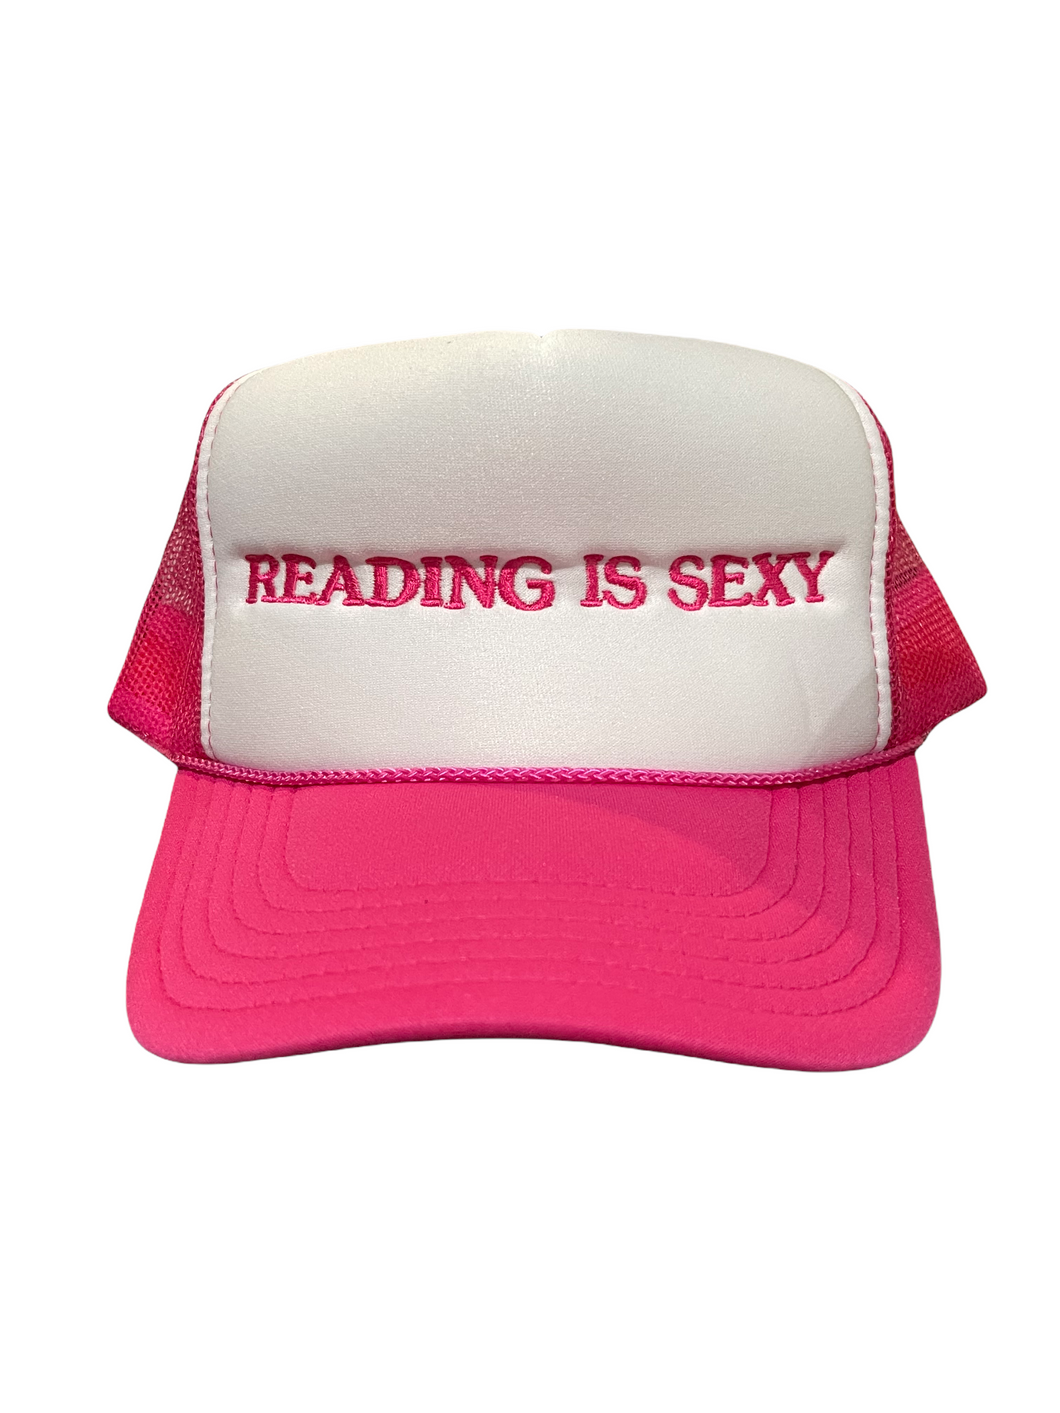 Reading is Sexy Trucker Hat - pink